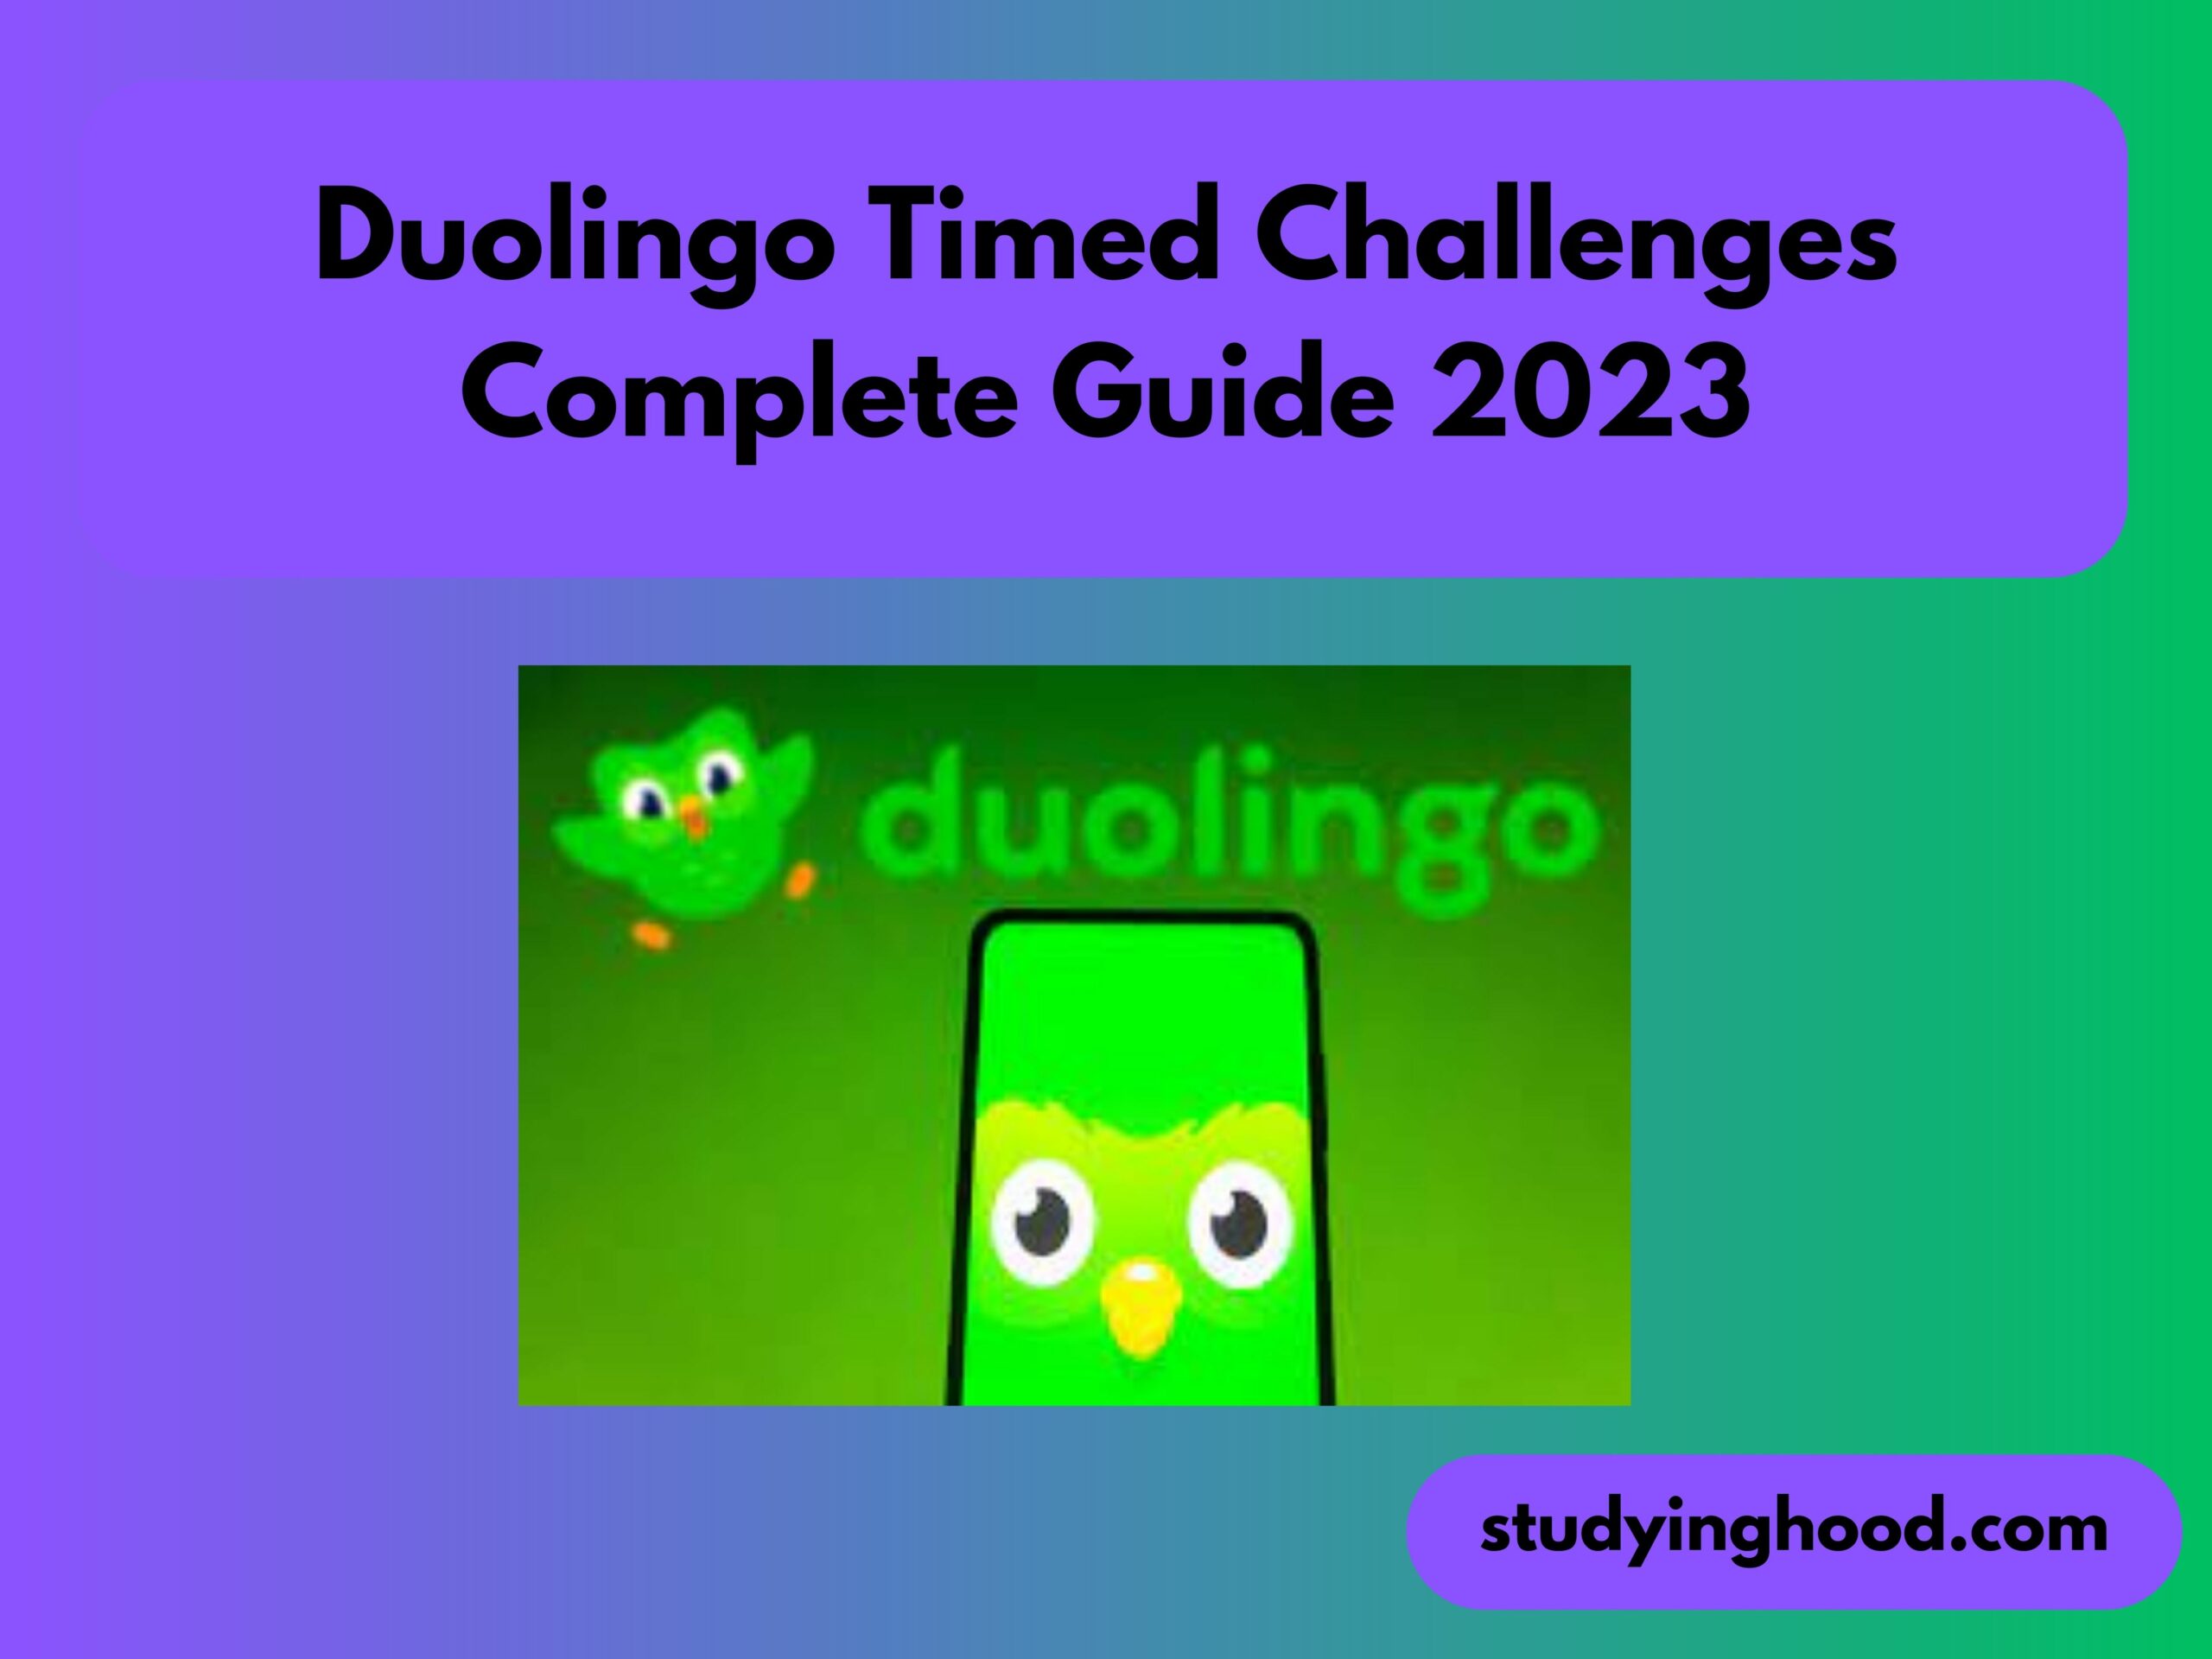 Duolingo Timed Challenges Complete Guide 2023